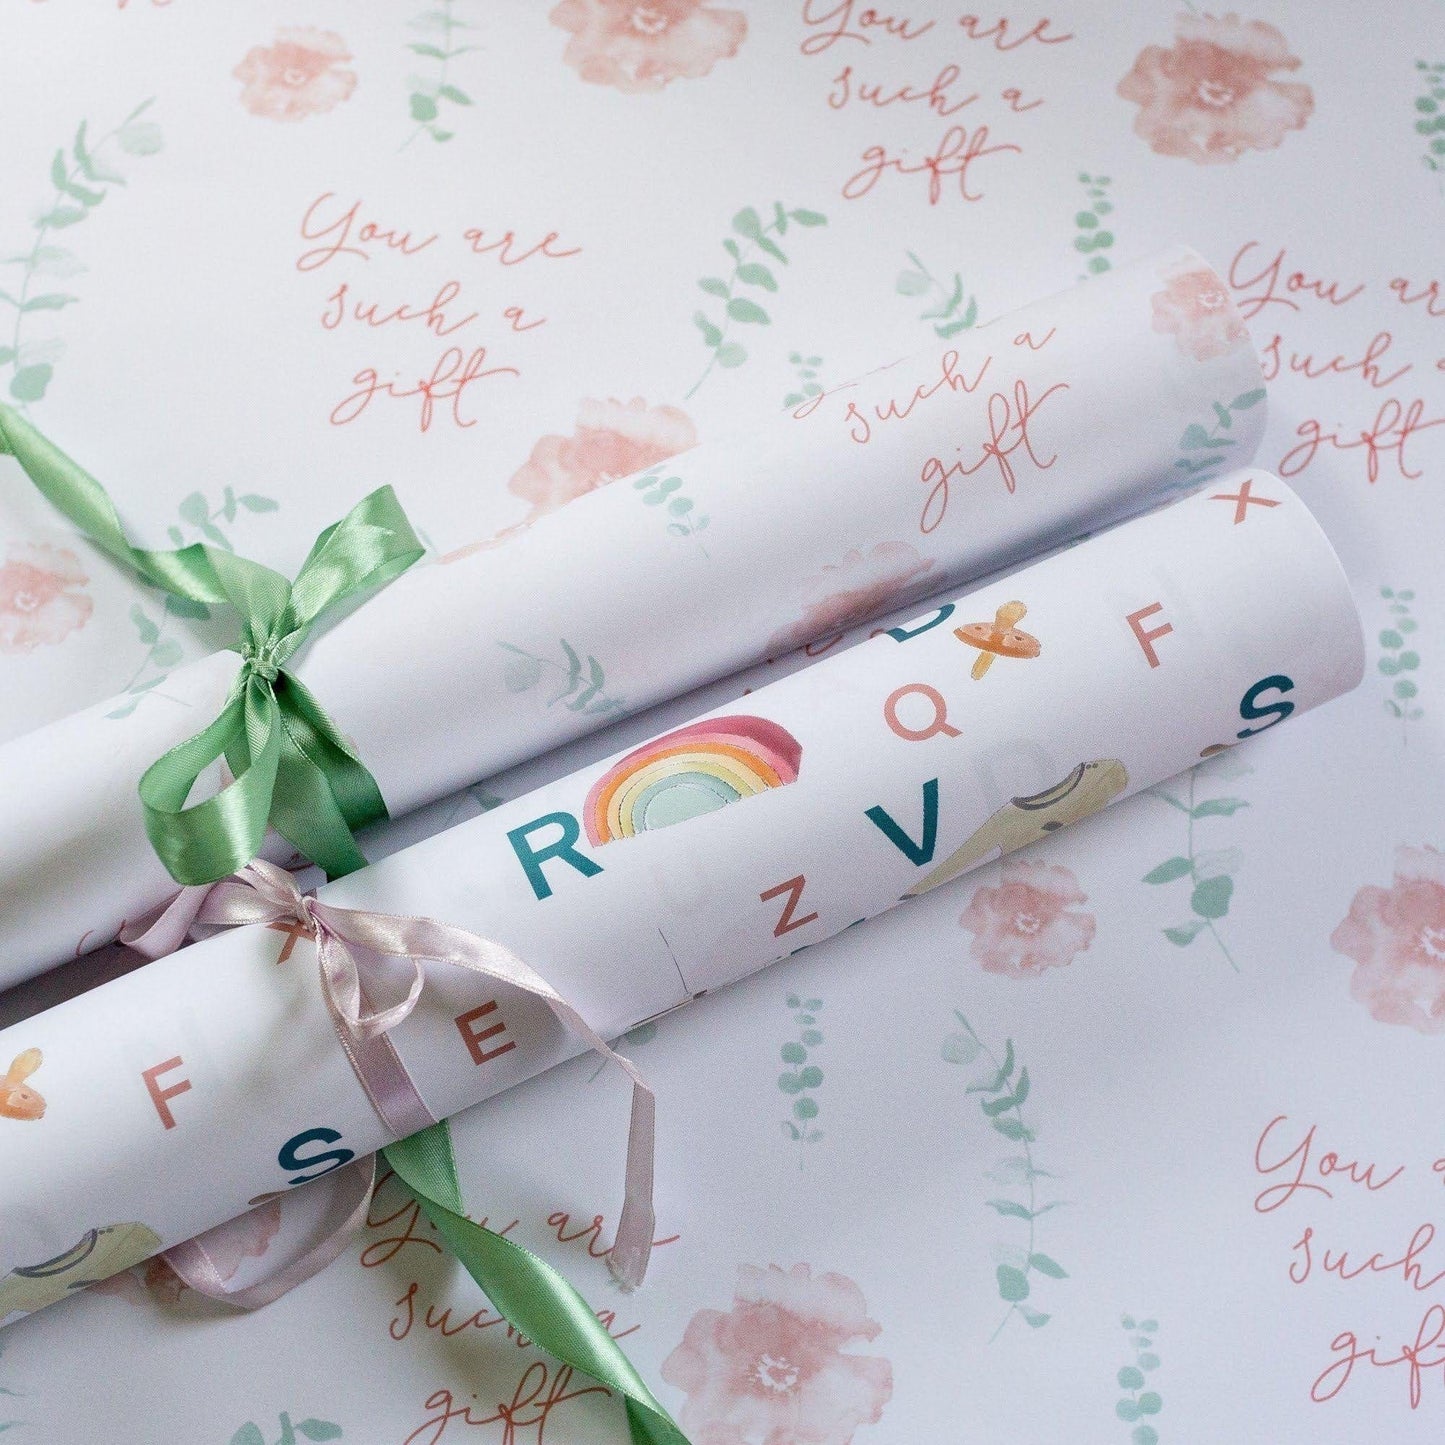 And Hope Designs Wrapping Paper “You are such a gift” wrapping paper